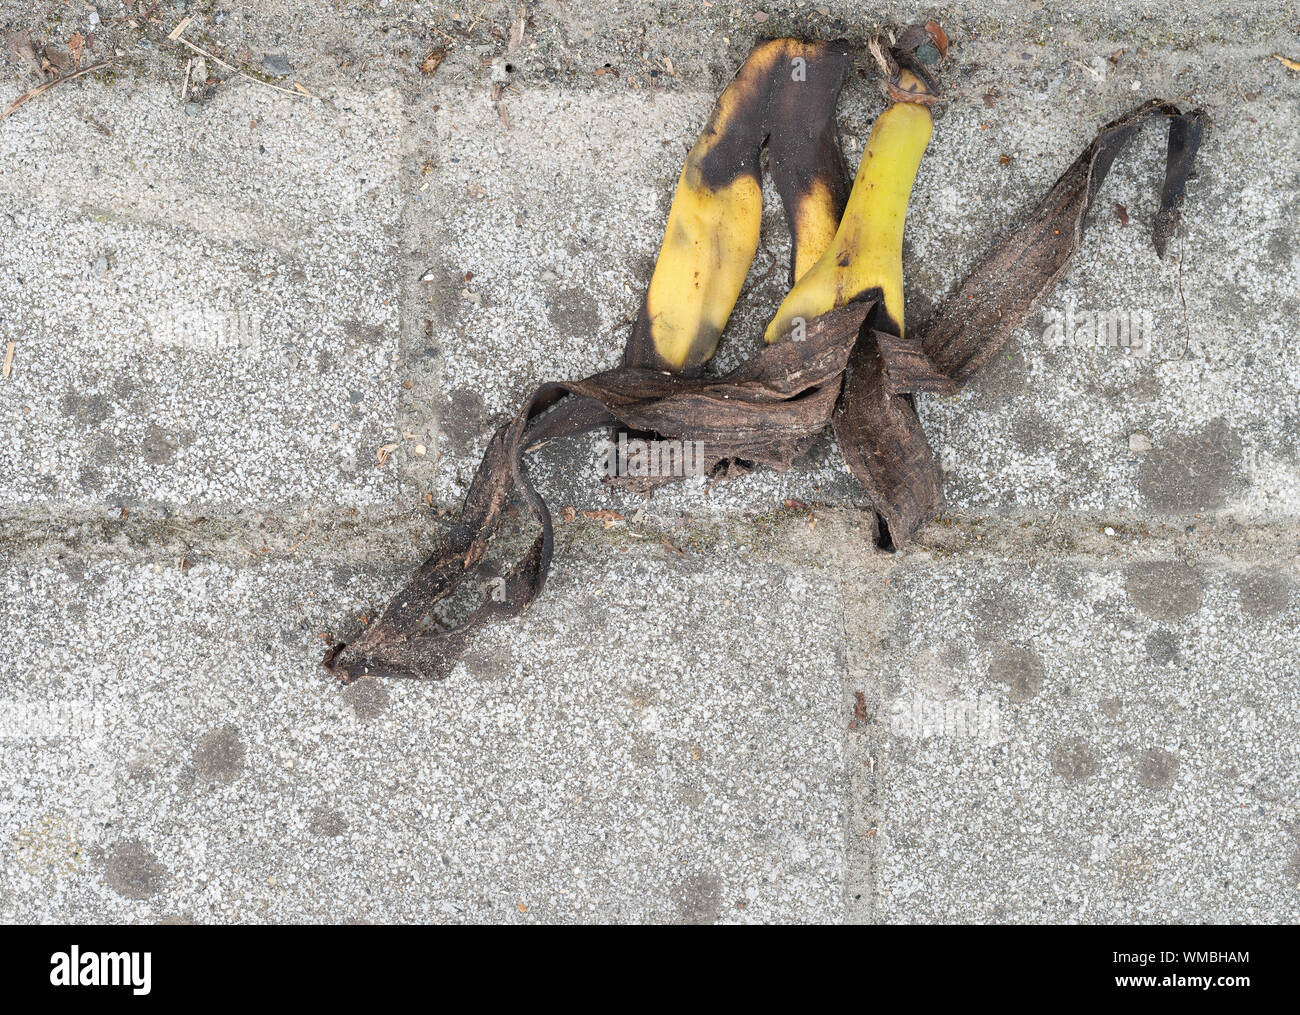 Old discarded banana skin on grubby pavement, sidewalk. Not biodegrading quickly. Stock Photo